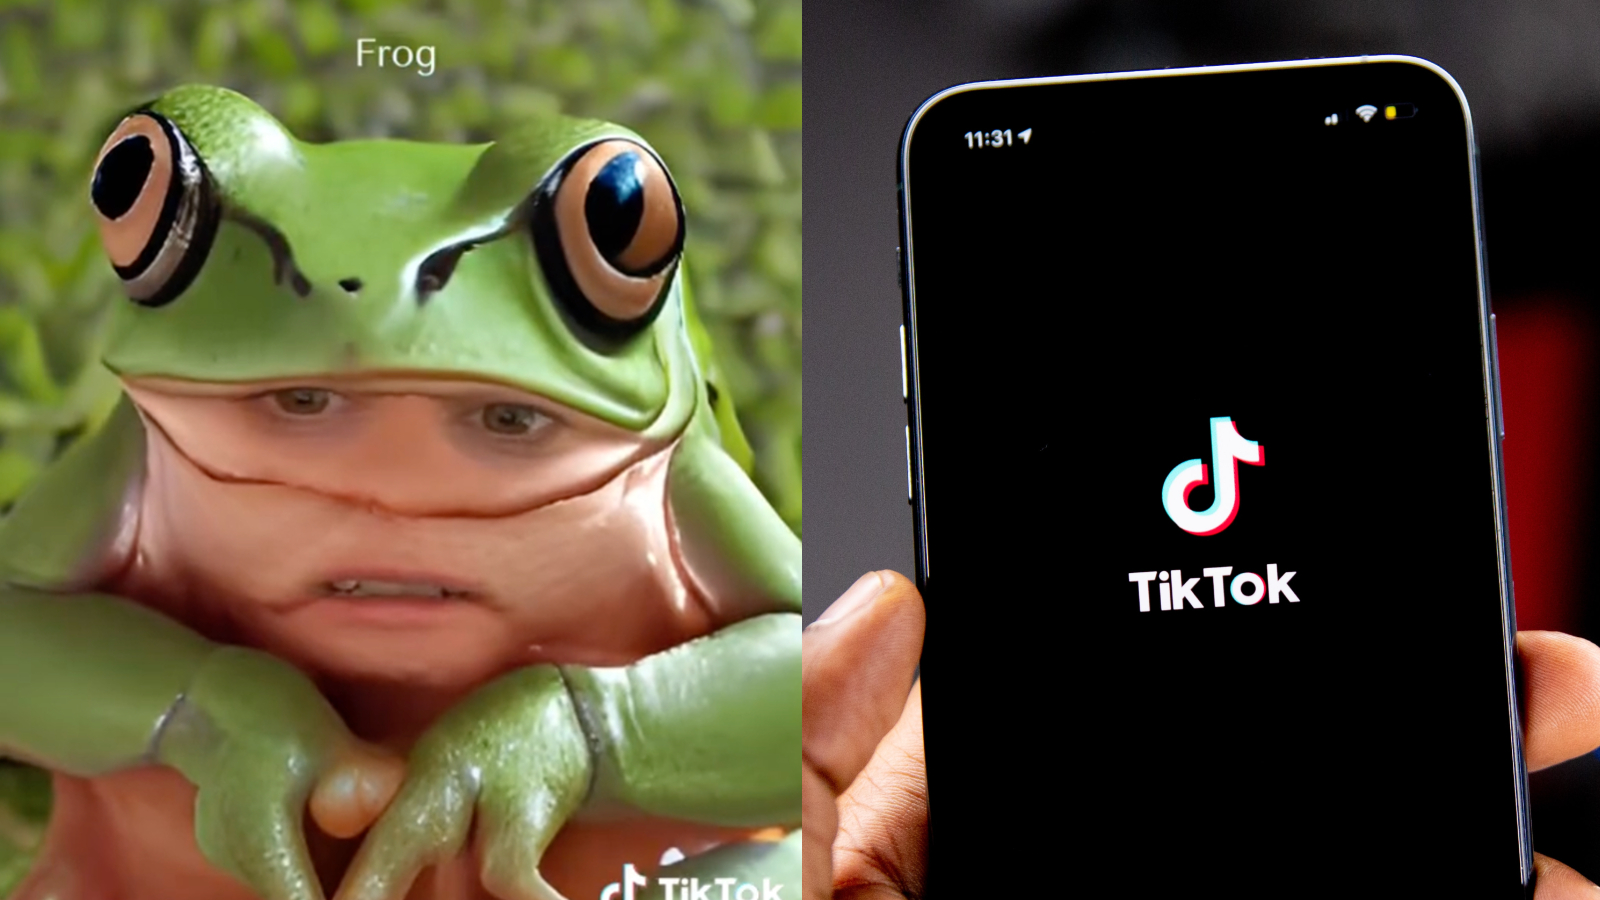 How to use TikTok’s AI face filter